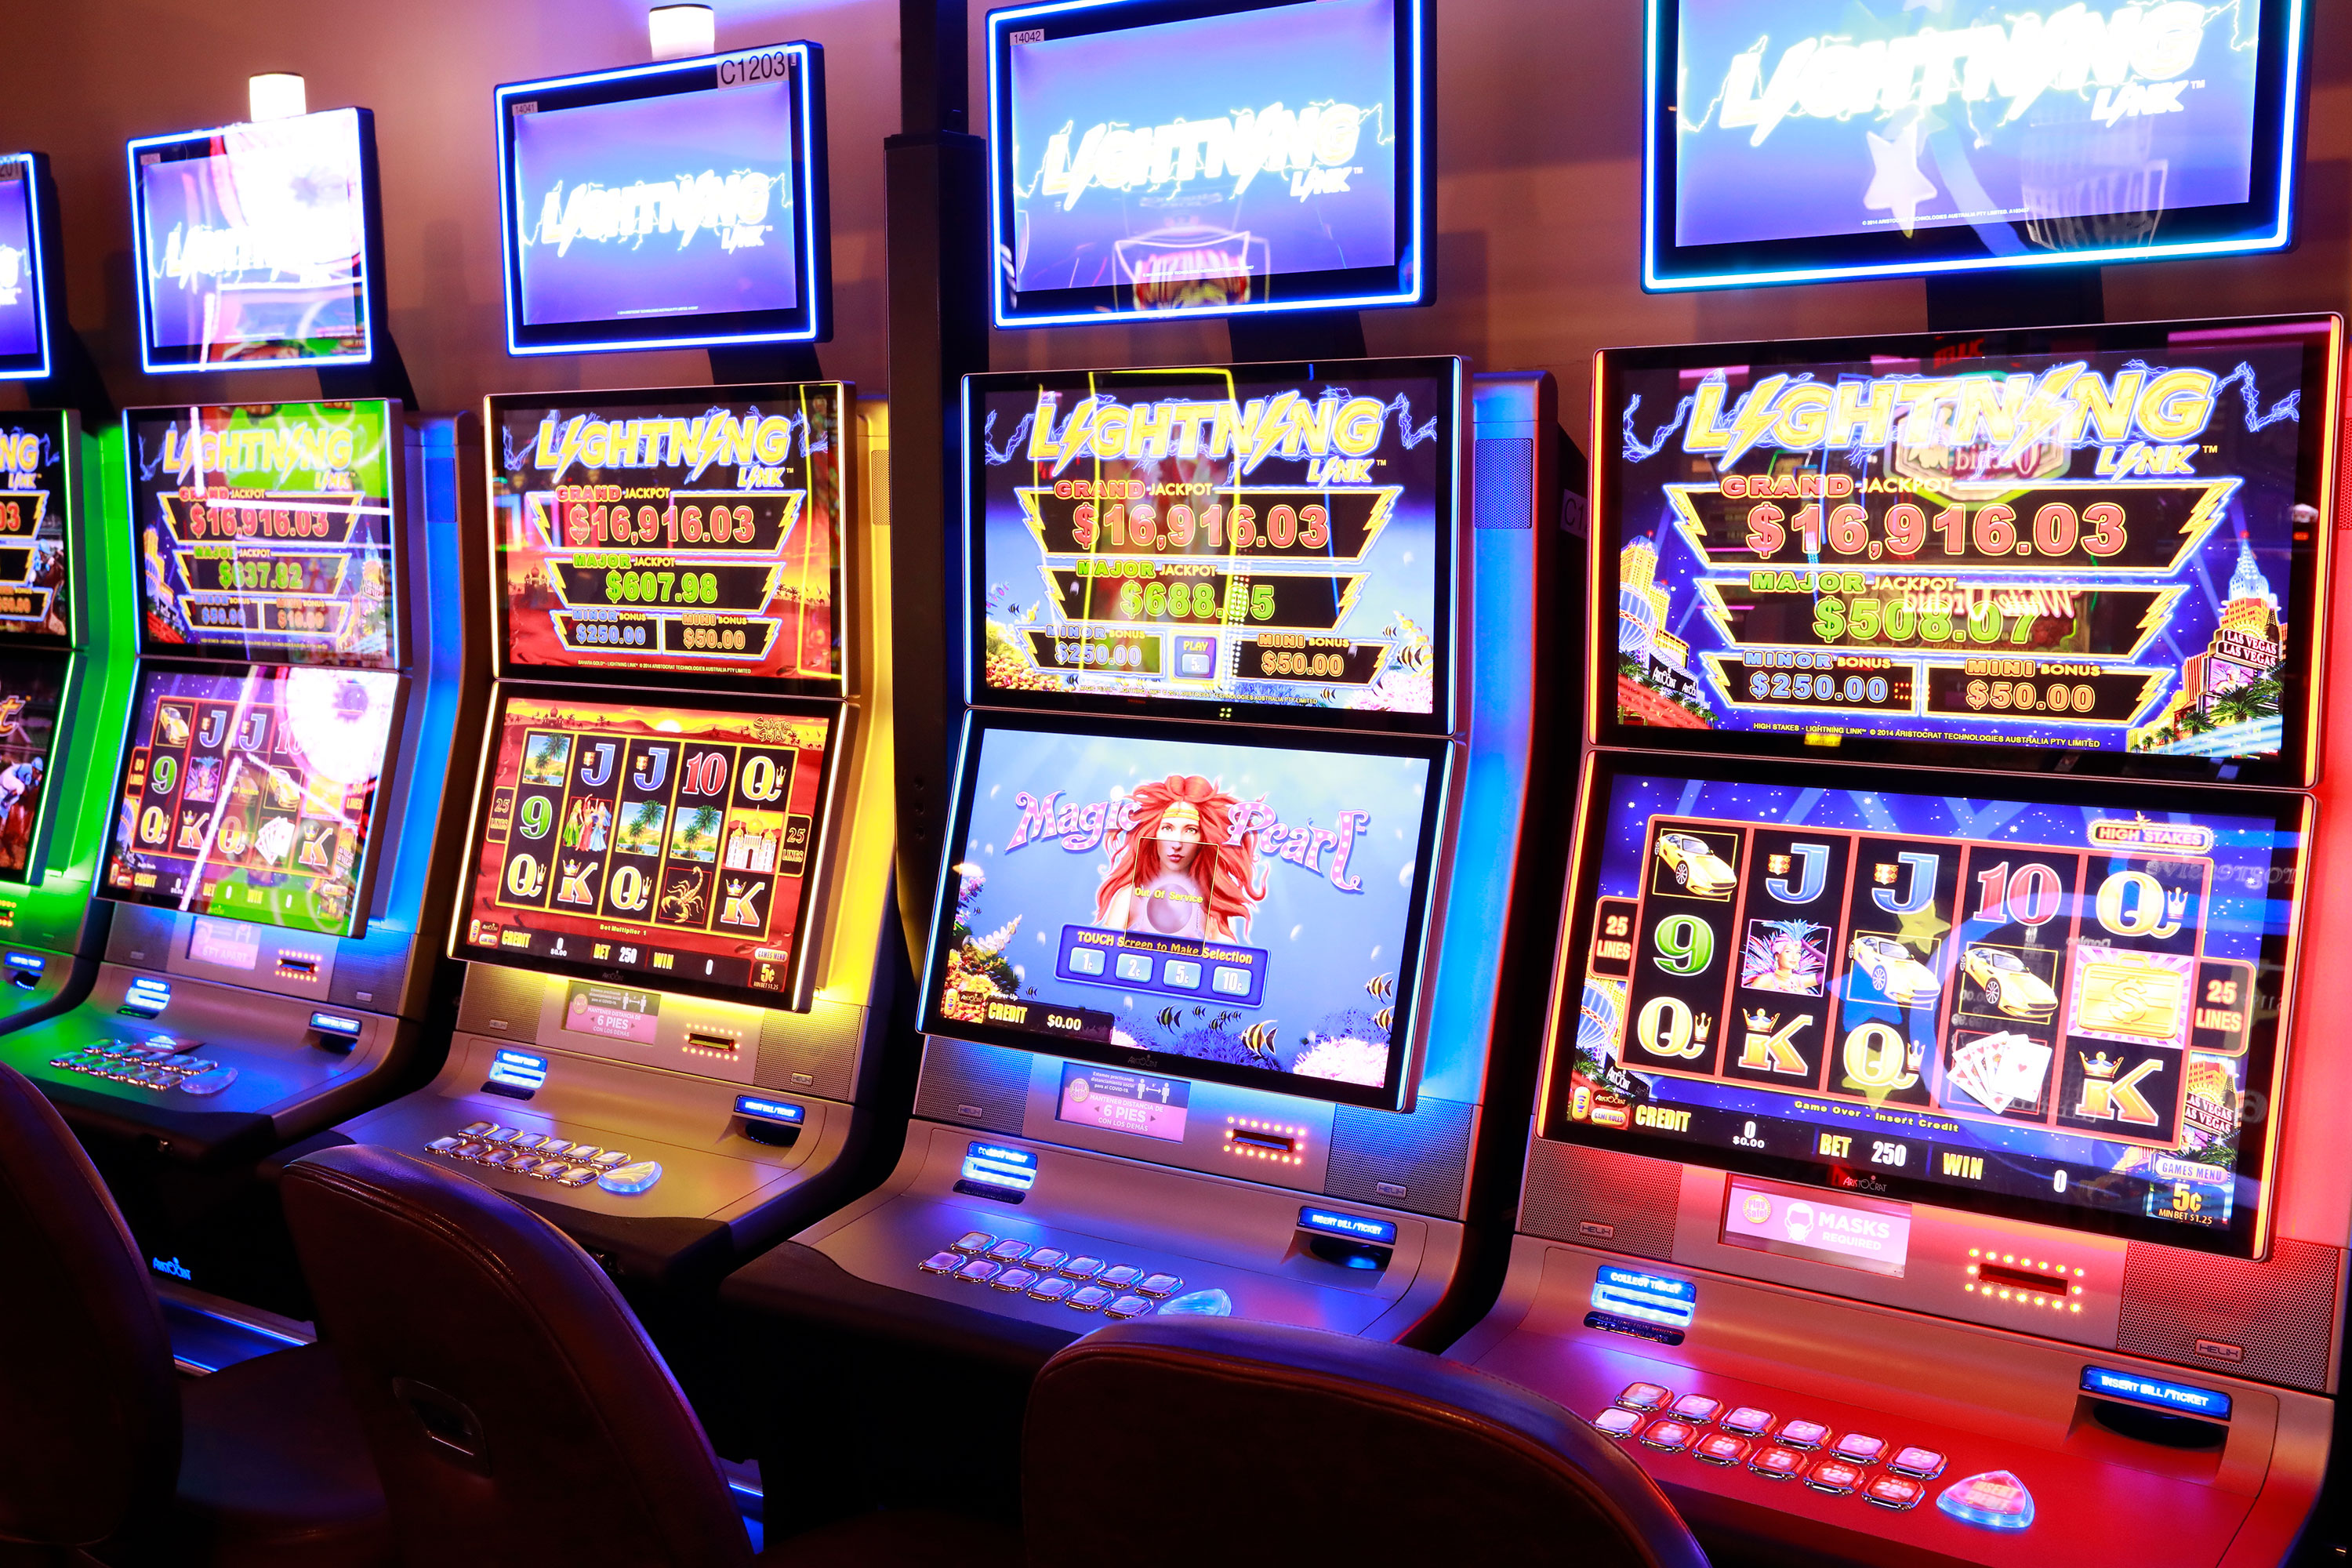 Retiree punched for breaking pokies 'etiquette’ | Queensland Times